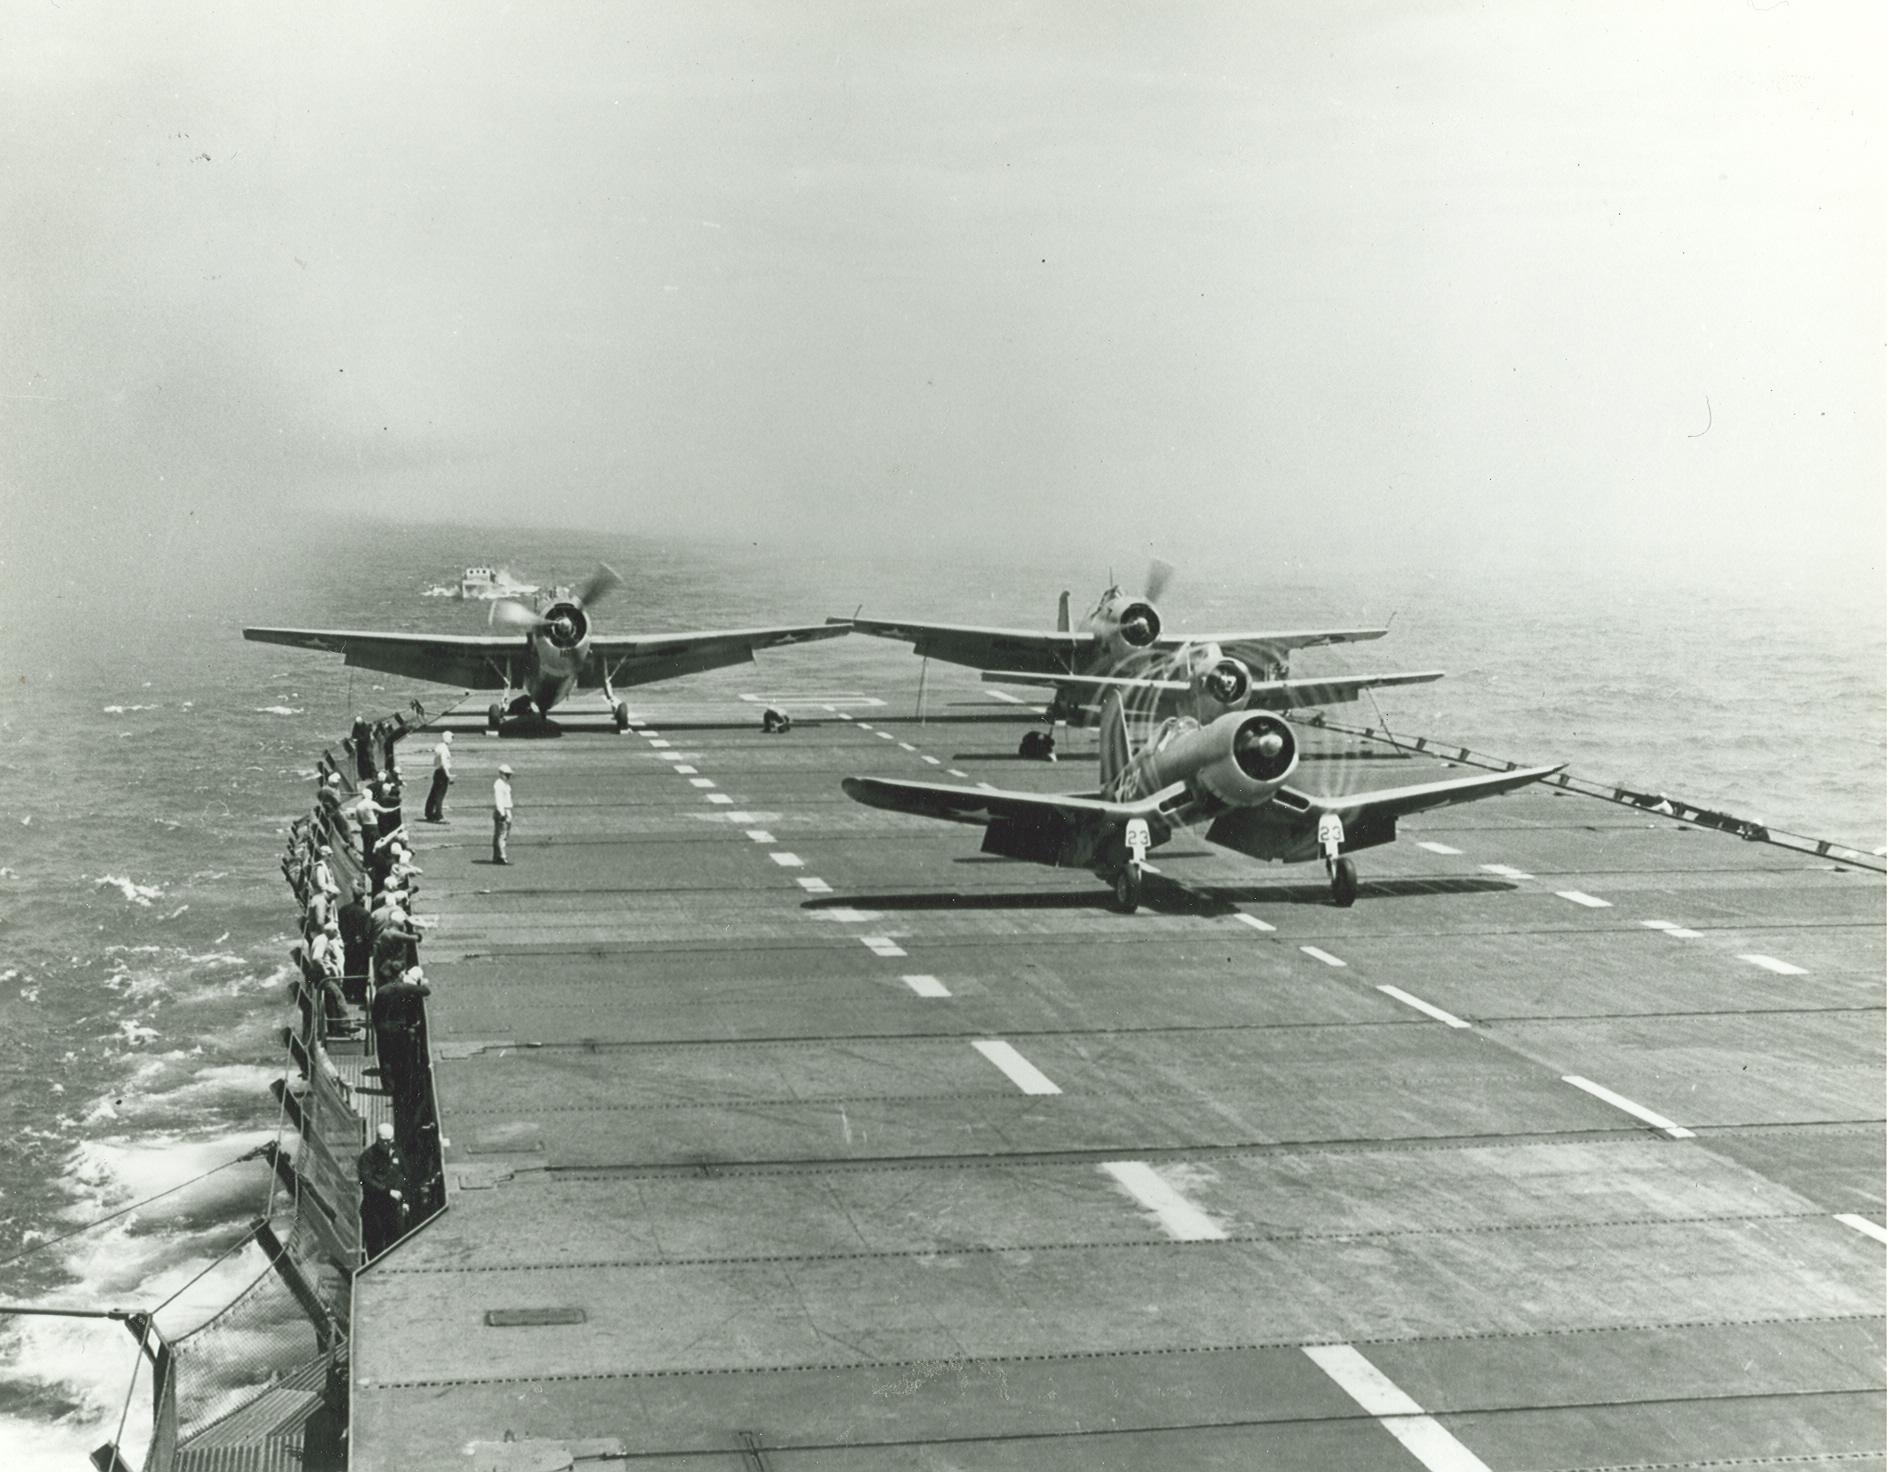 F4U-1 Corsair, an F4F Wildcat, and two TBF-1 Avengers run up their engines prior to launch from the training aircraft carrier USS Sable on Lake Michigan, United States, mid-1943.